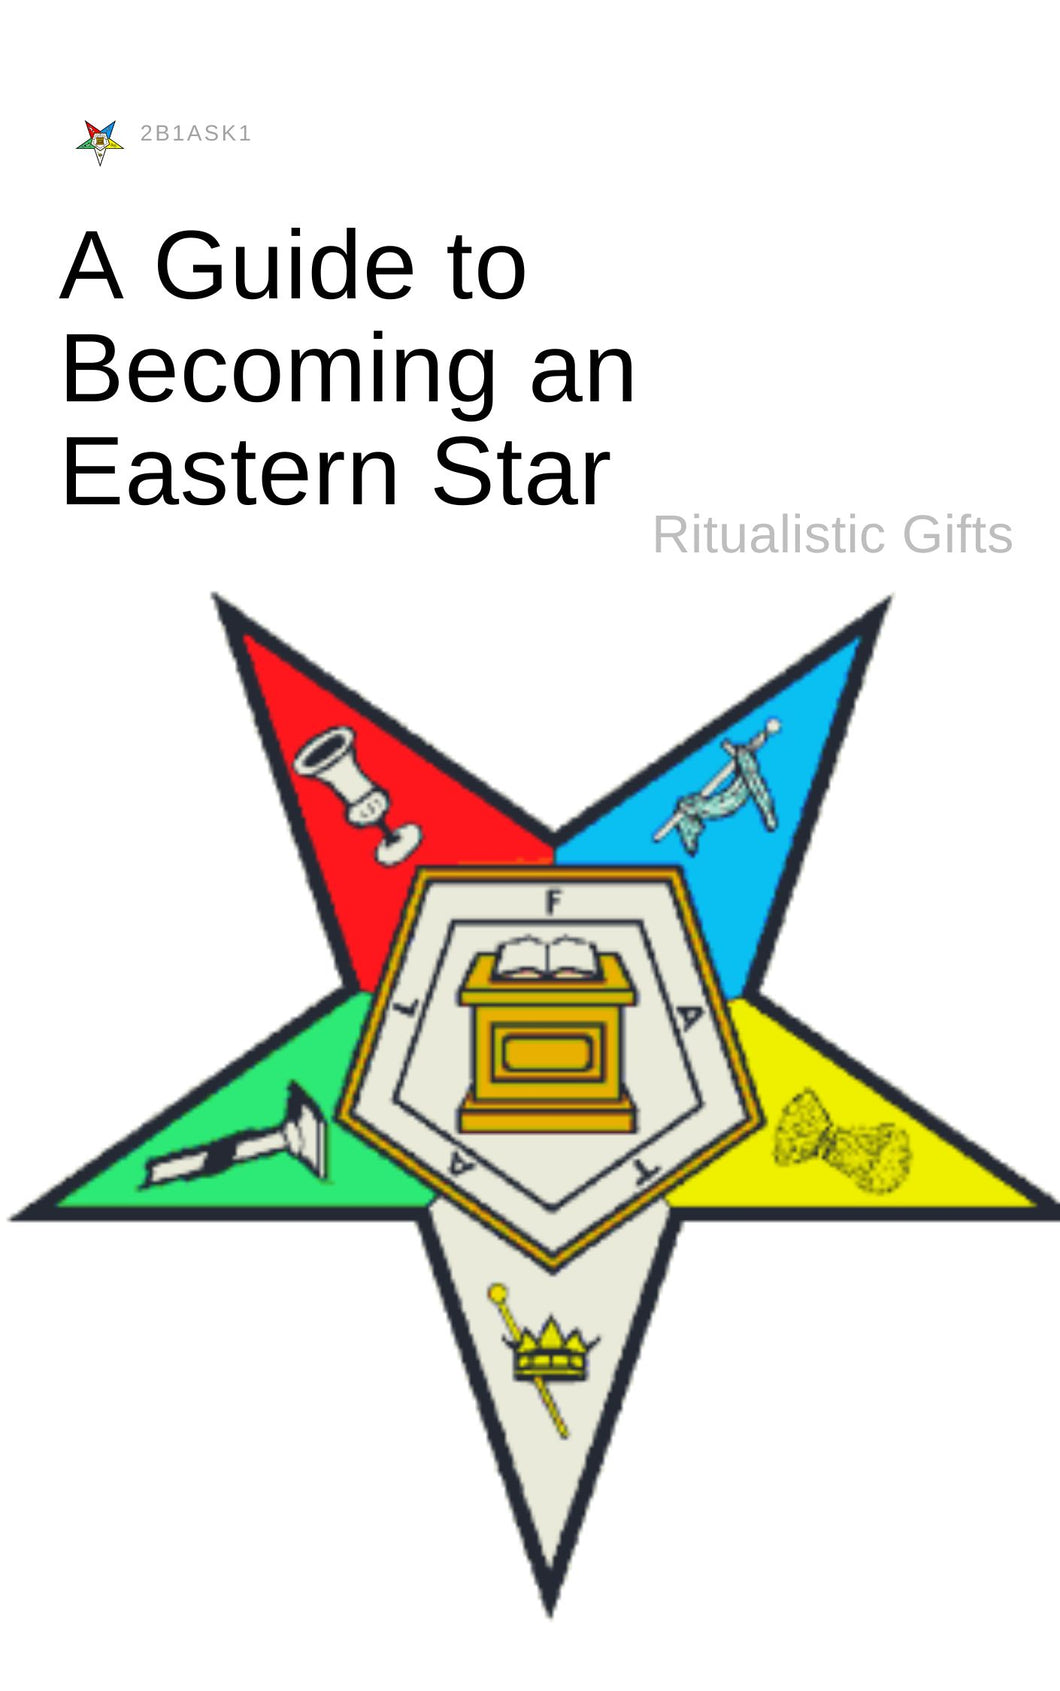 A Guide on Becoming an Eastern Star